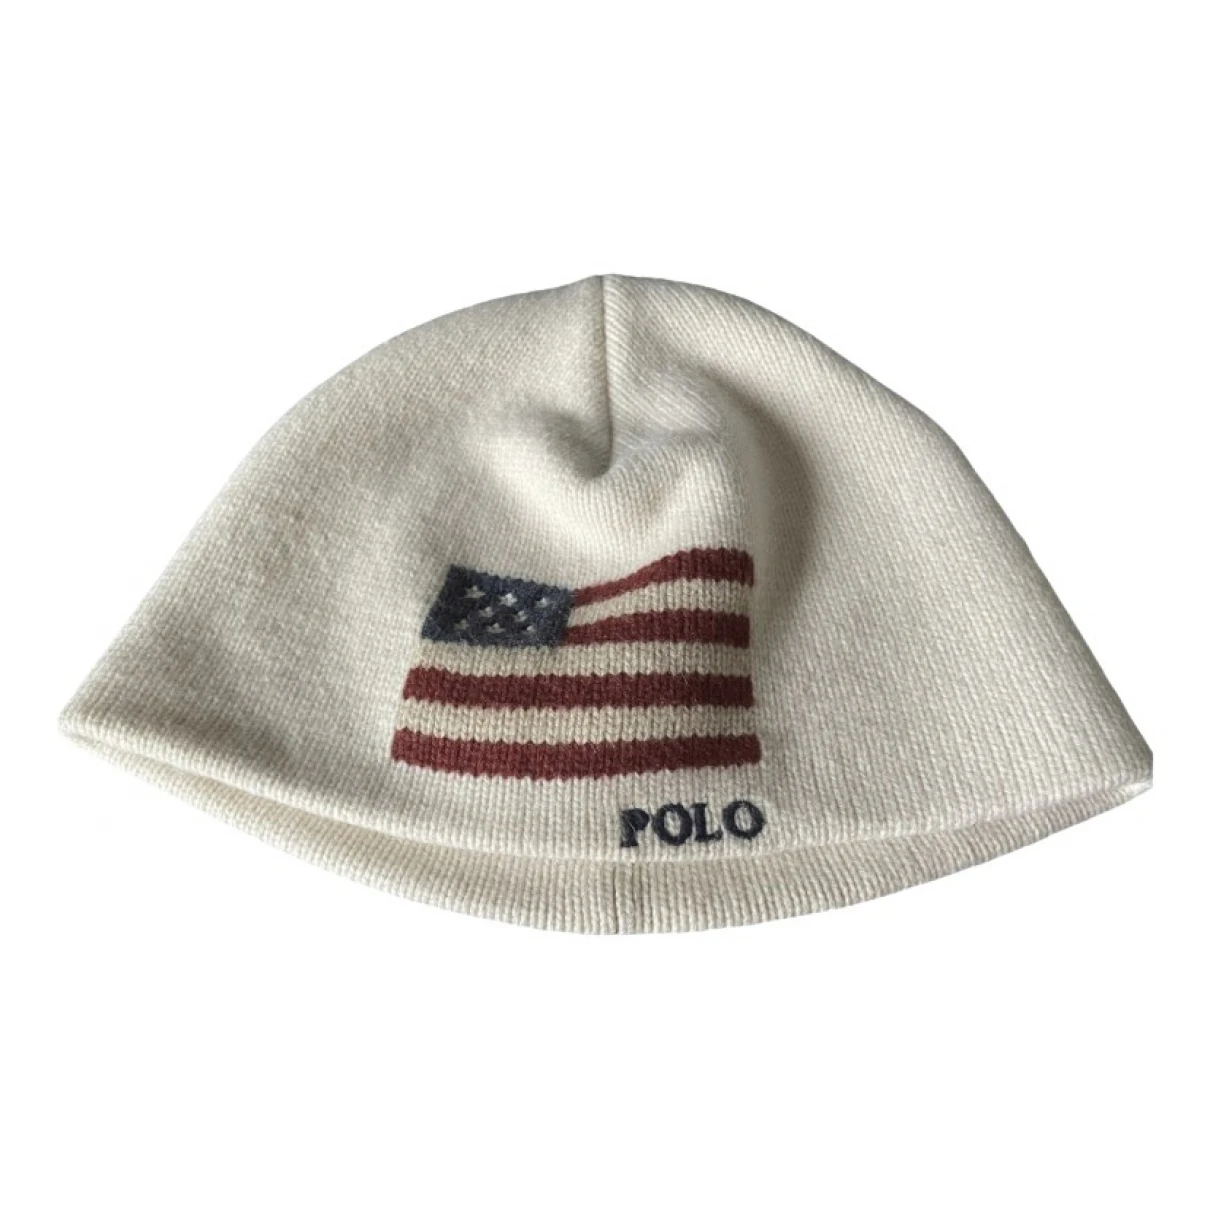 accessories Polo Ralph Lauren hats & pull on hats for Male Wool L International. Used condition